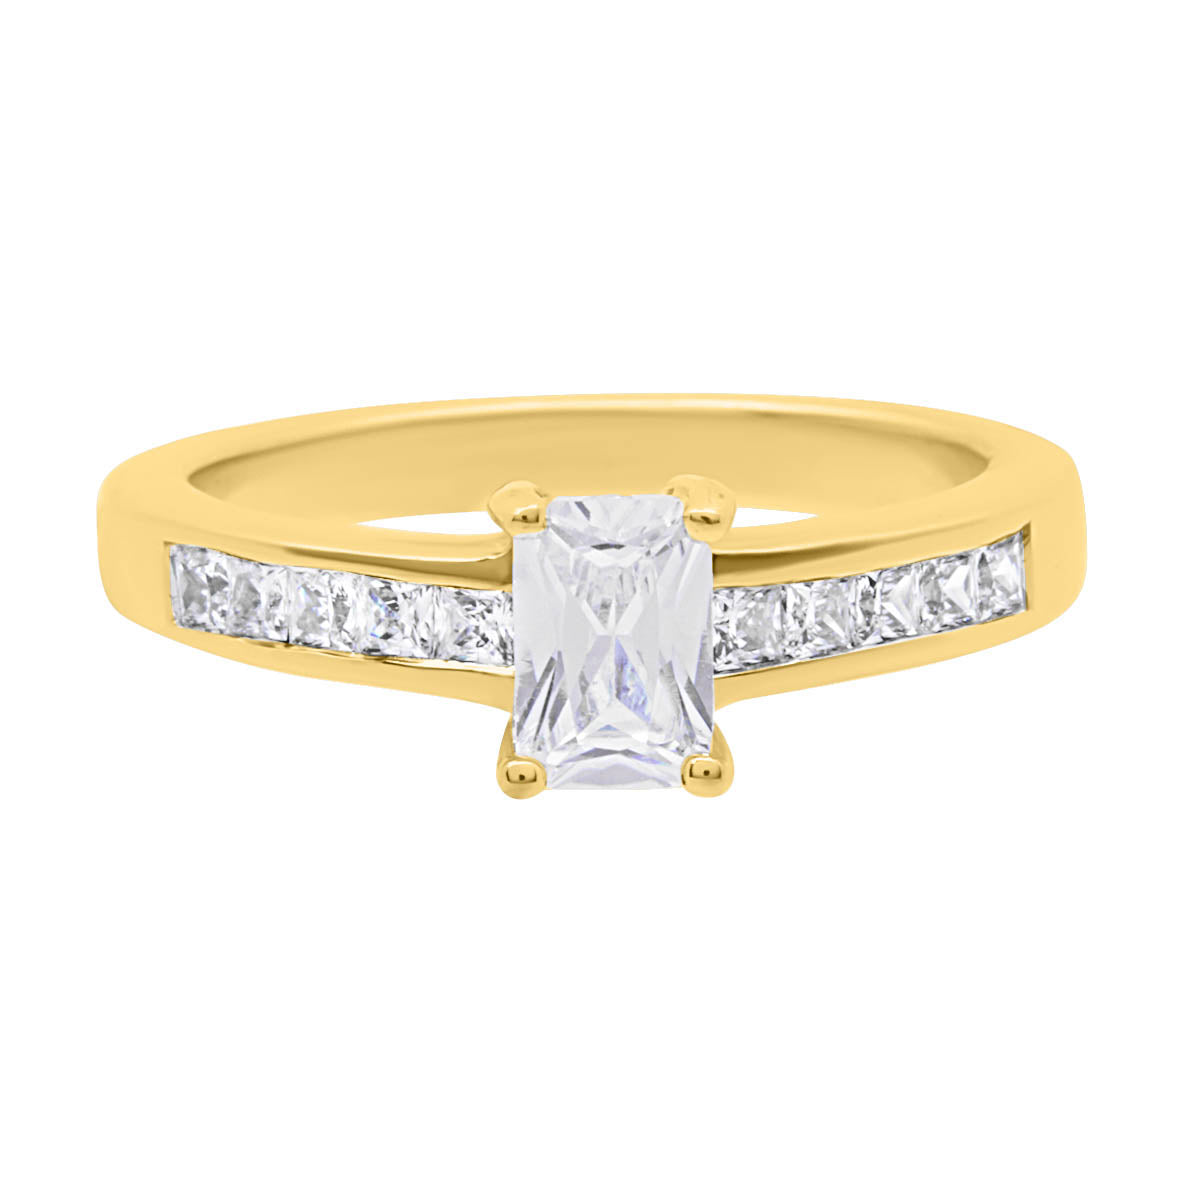 Radiant Cut Engagement Ring in yellow gold